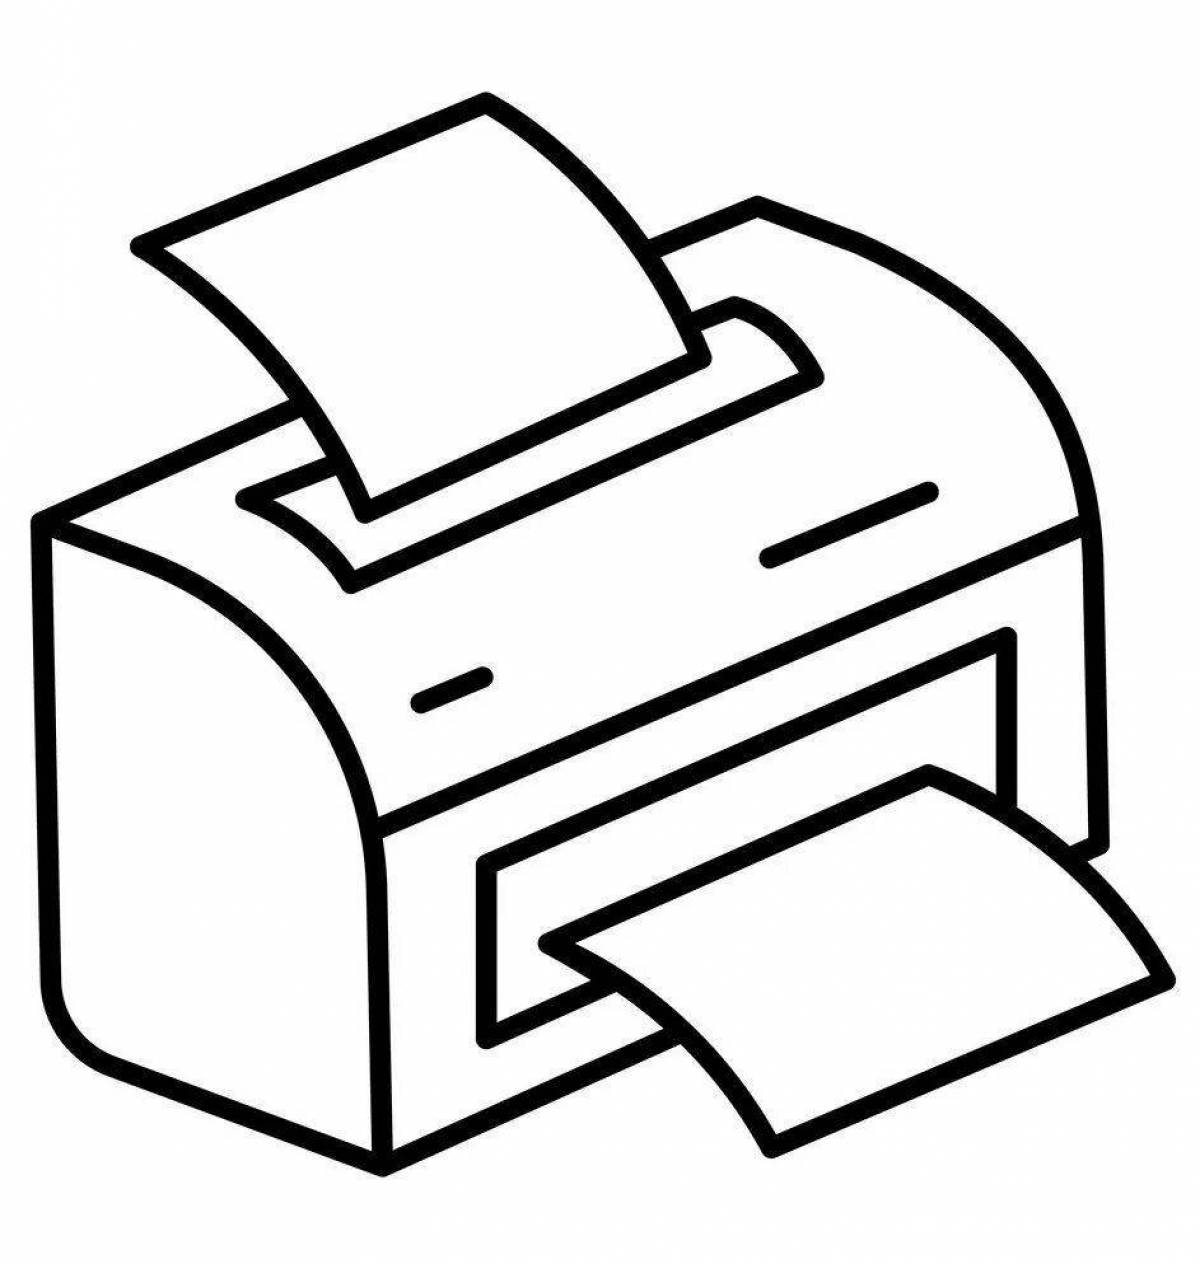 Colorful printer coloring page